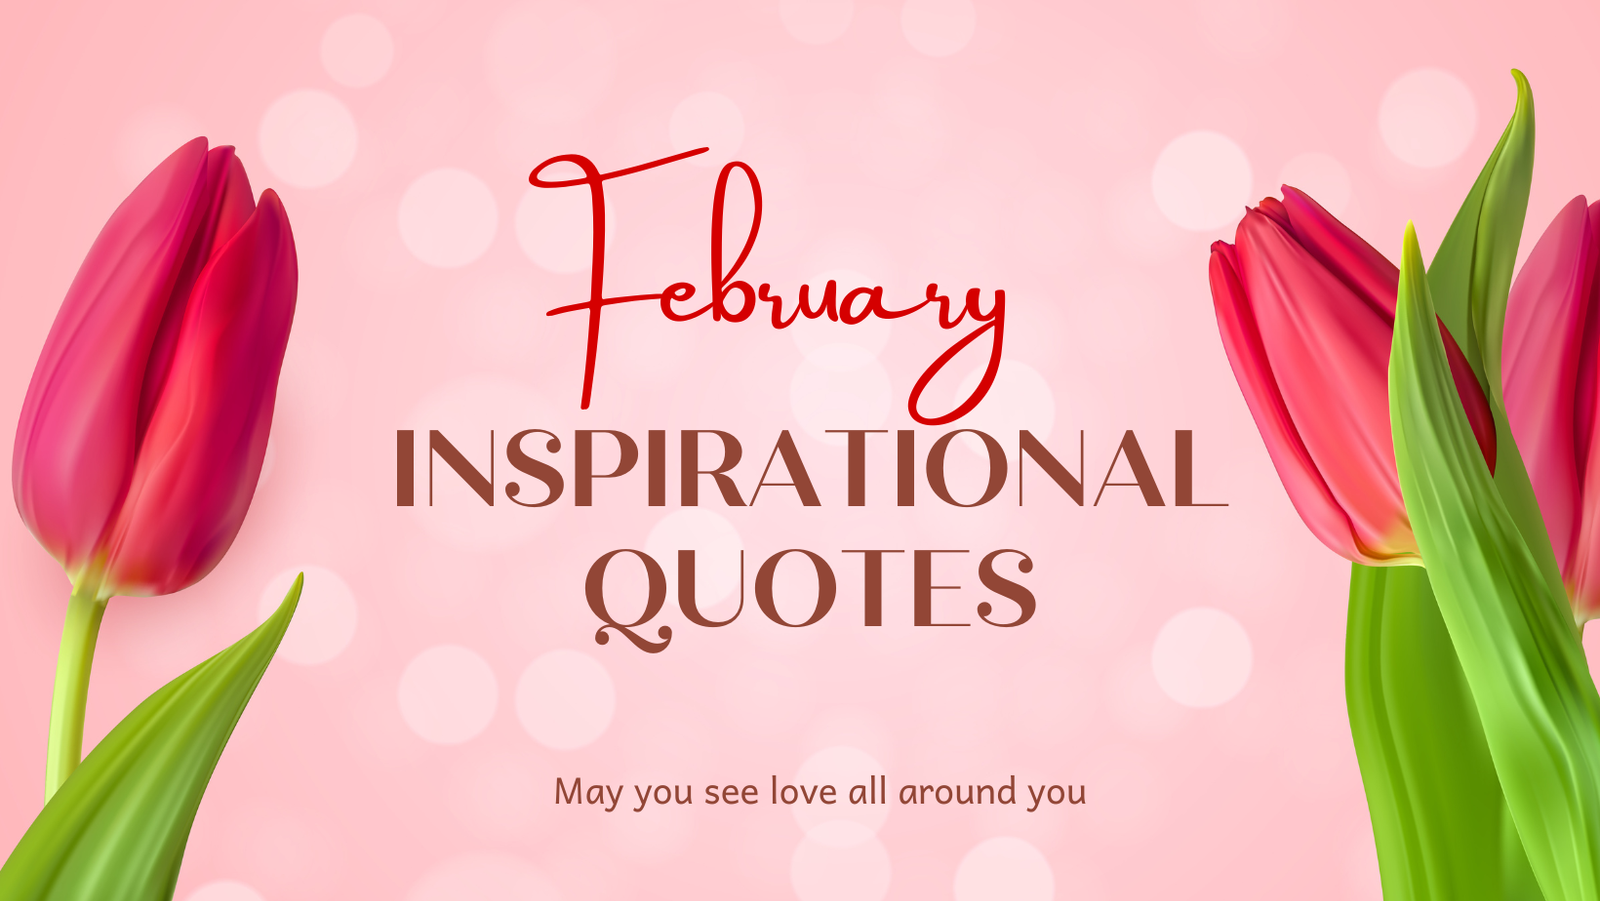 25+ February Inspirational Quotes to Motivate and Celebrate the Month